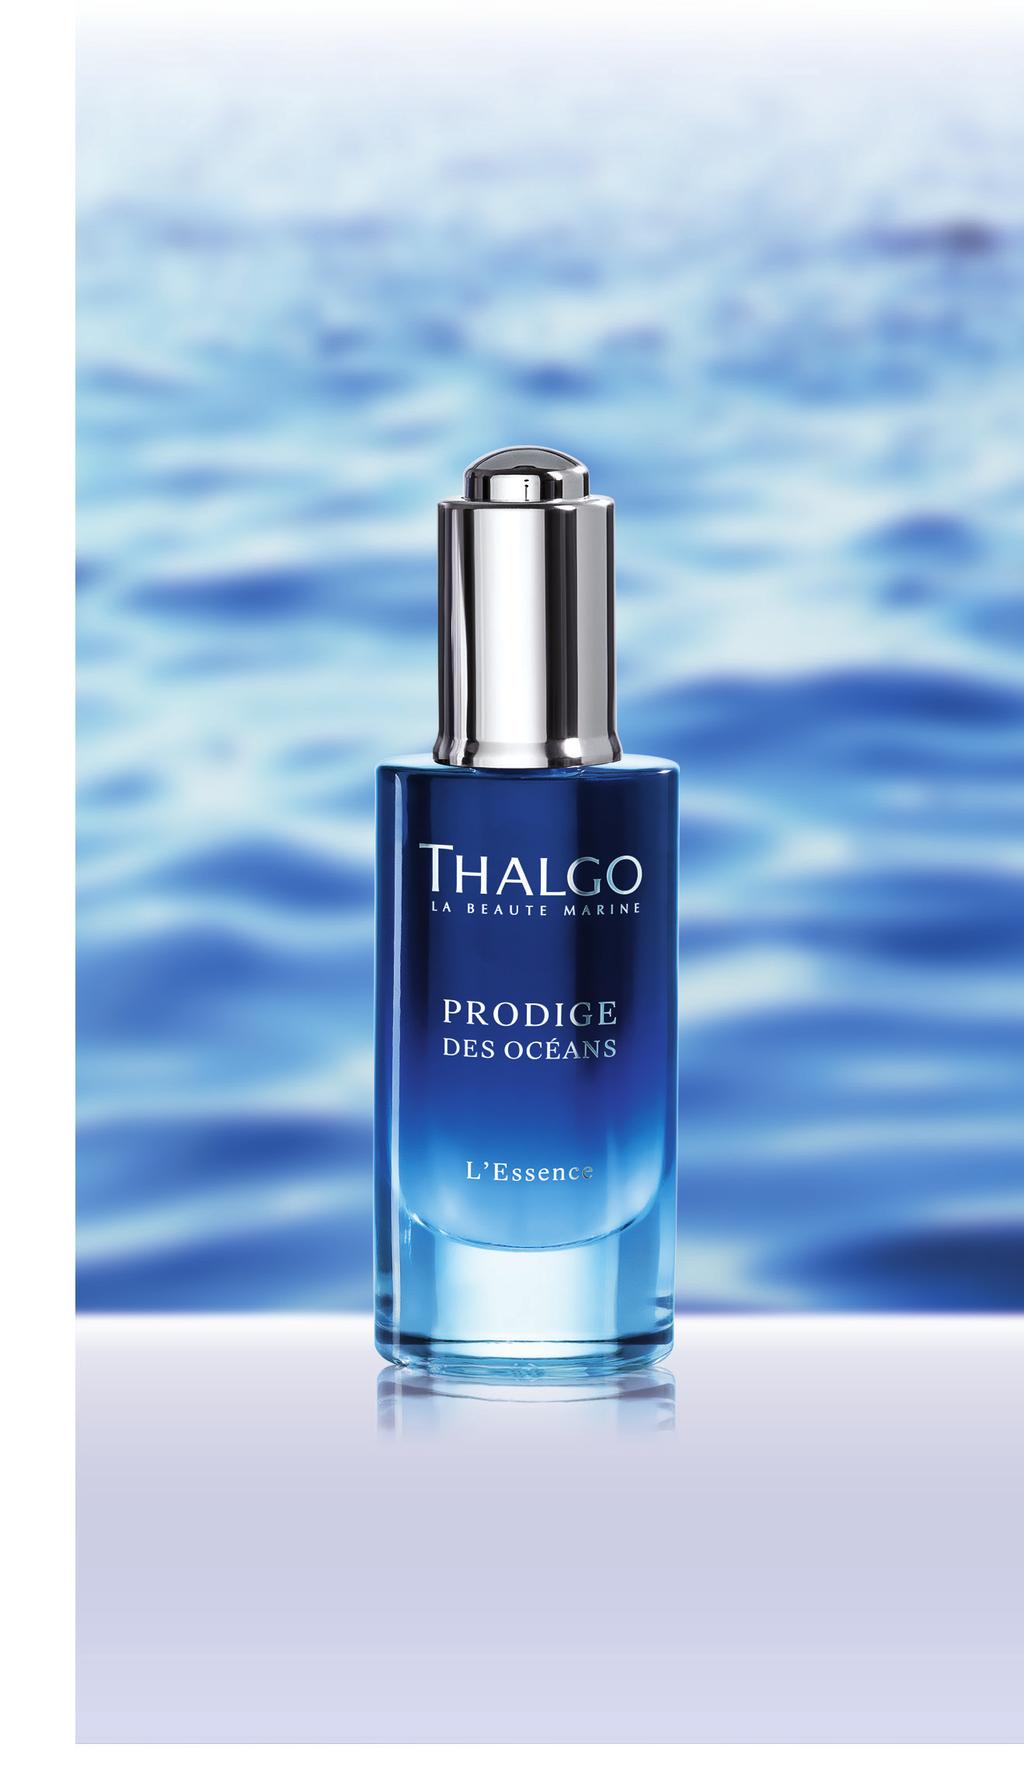 Essence MULTI-PERFECTION - TOTAL YOUTHFULNESS So effective that a single drop reactivates the key signs of flawless skin Powerful active concentration: Intelligence Marine Régénérative reactivates